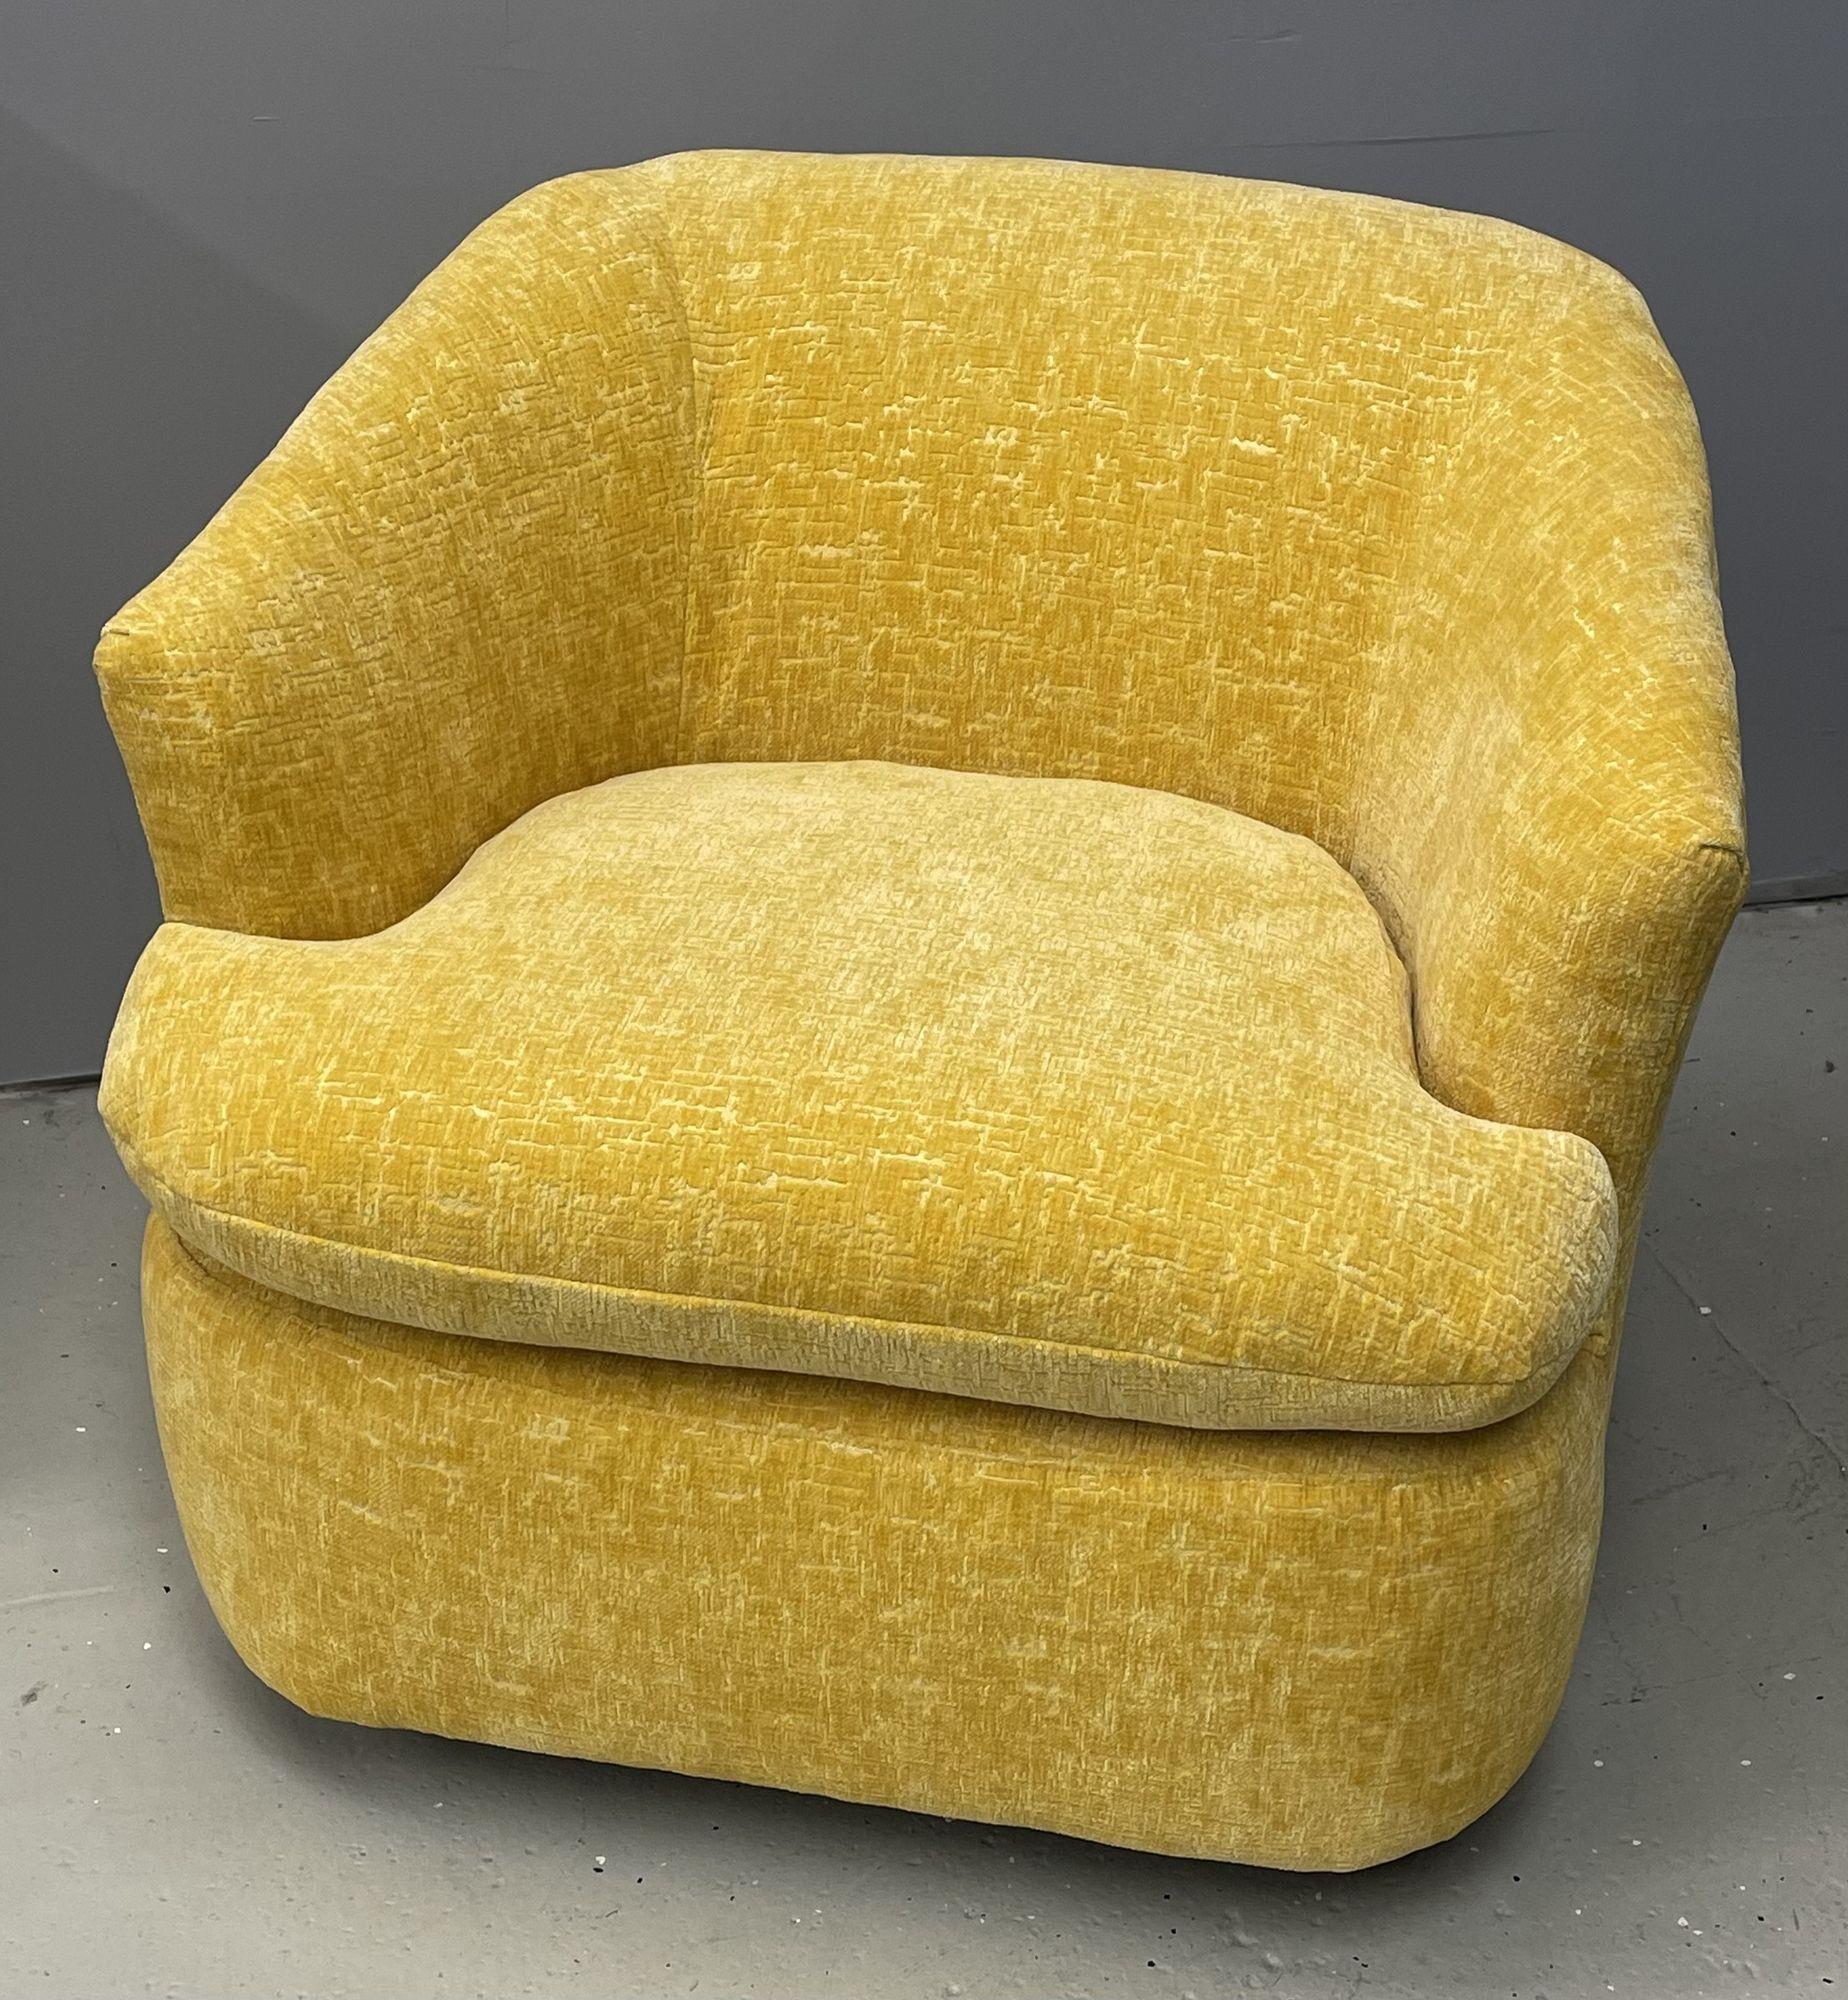 Pair of Milo Baughman style swivel / tub chairs, in a new Yellow Textured Upholstery
 
These recently upholstered pair of club or tub chairs sit on strong metal swivel bases. The pair extreamly comfortable. 
 
Other American designers of the